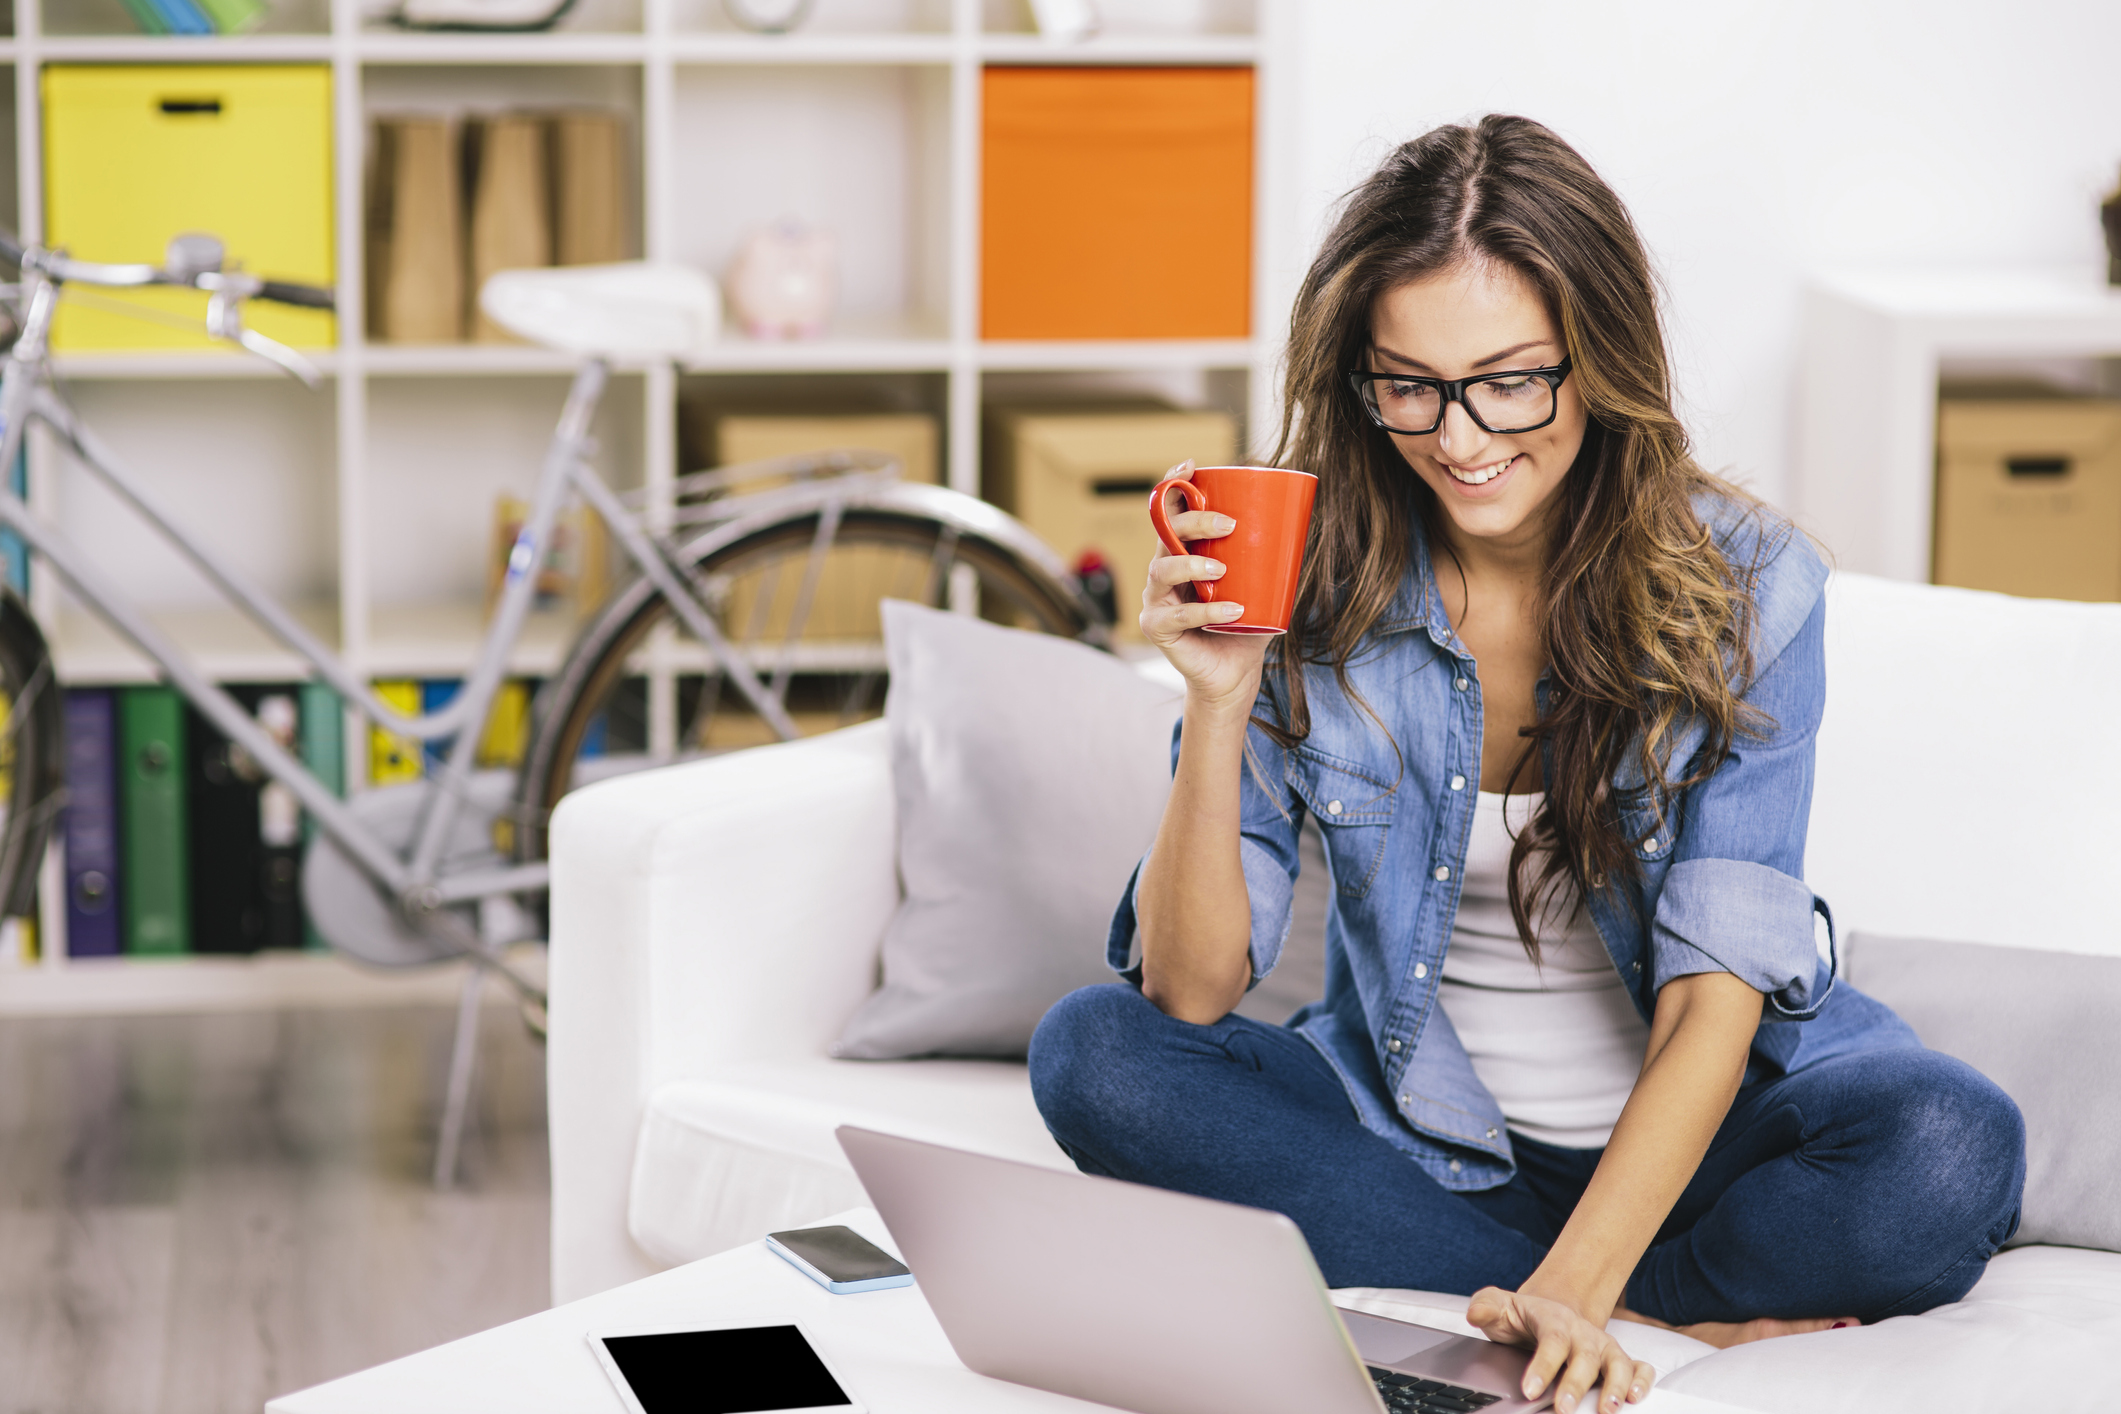 A smiling woman sits at home with a mug and a laptop.